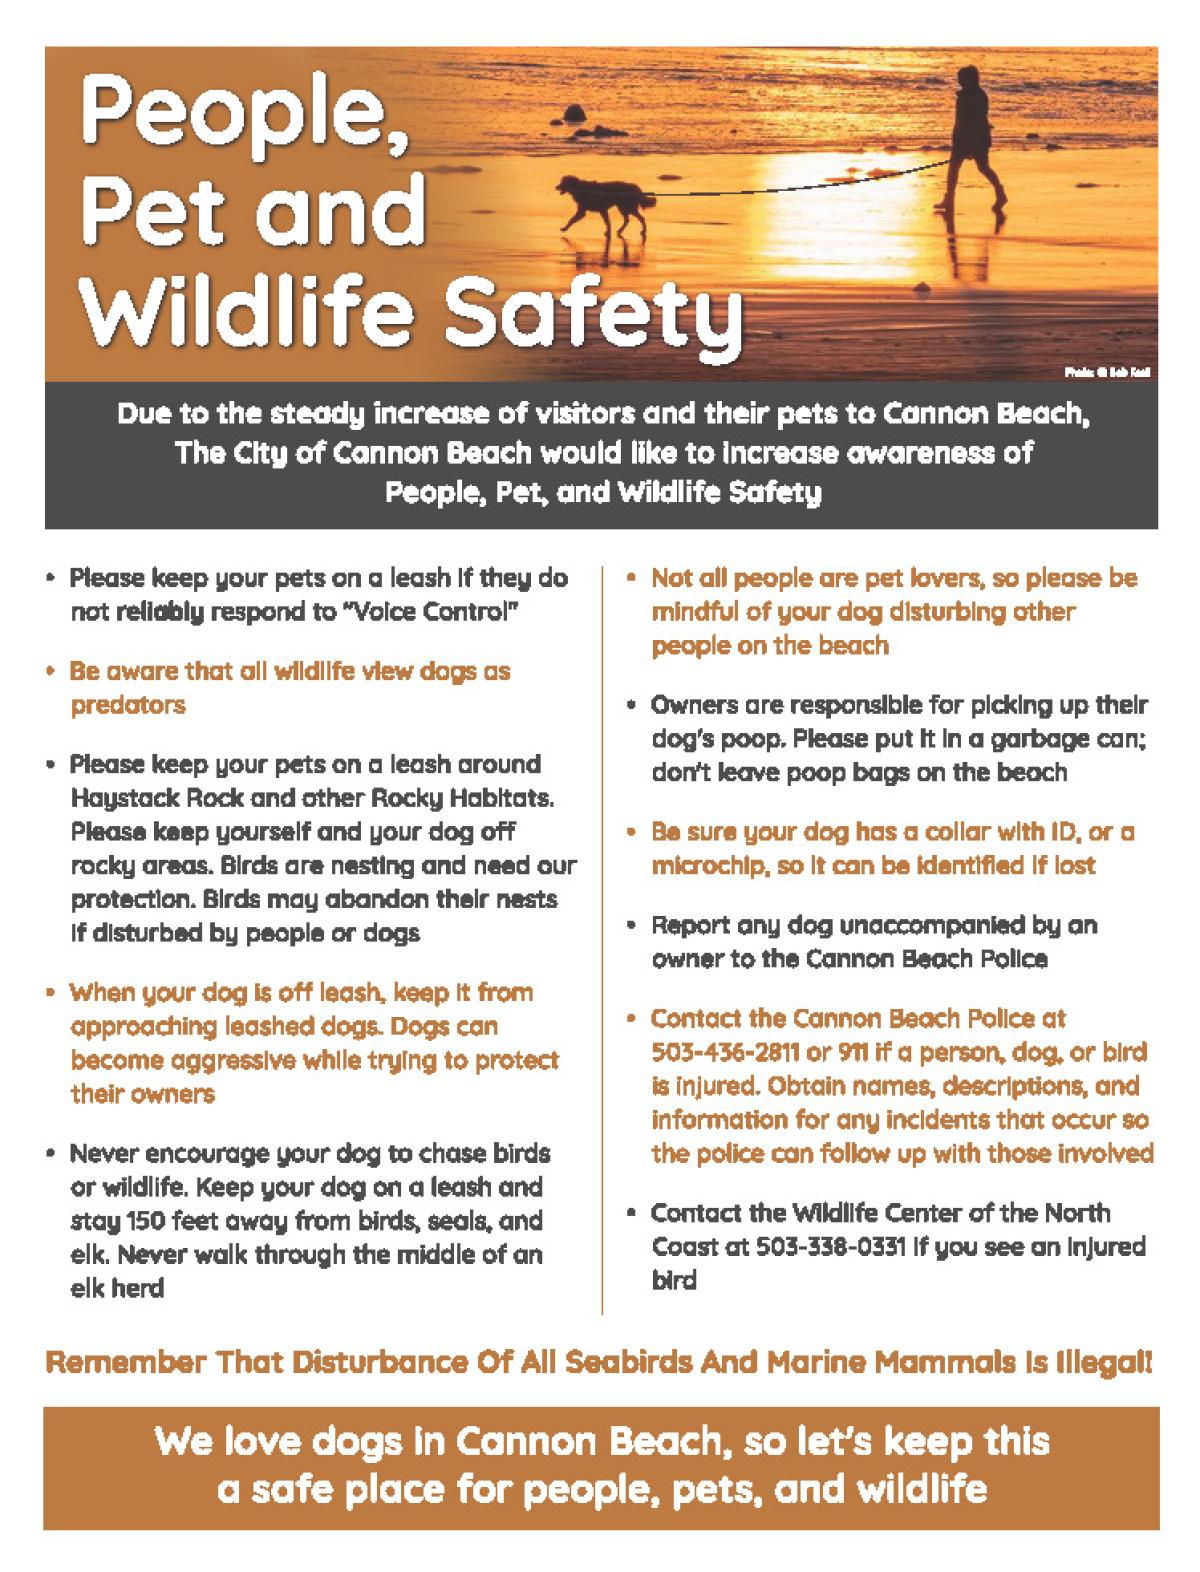 People, Pet and Wildlife Safety flyer